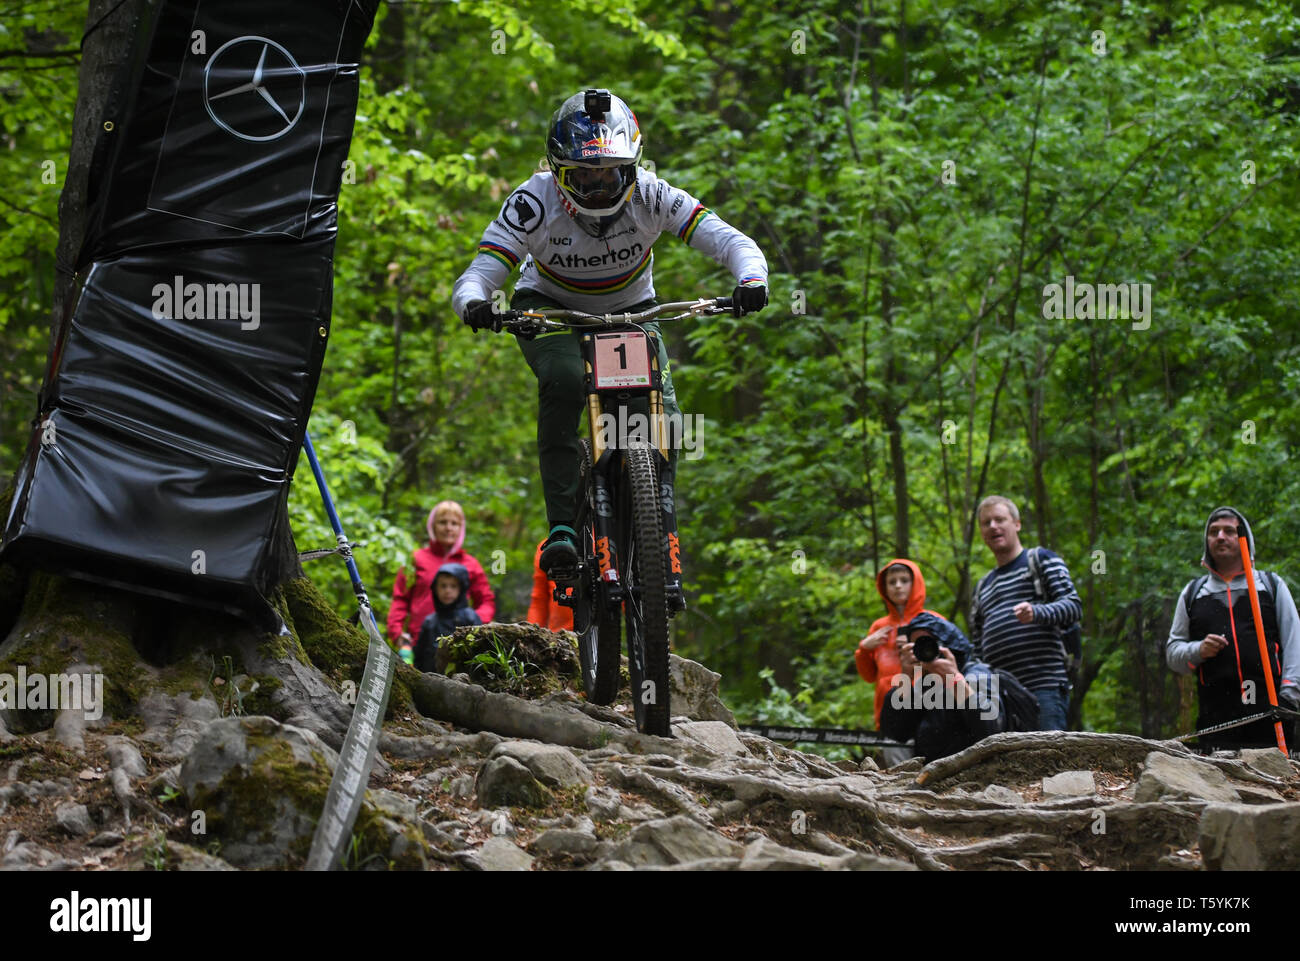 Rachel Atherton of Great Britain is seen in action during the Qualifying round at the UCI Mountain Bike World Cup. Stock Photo